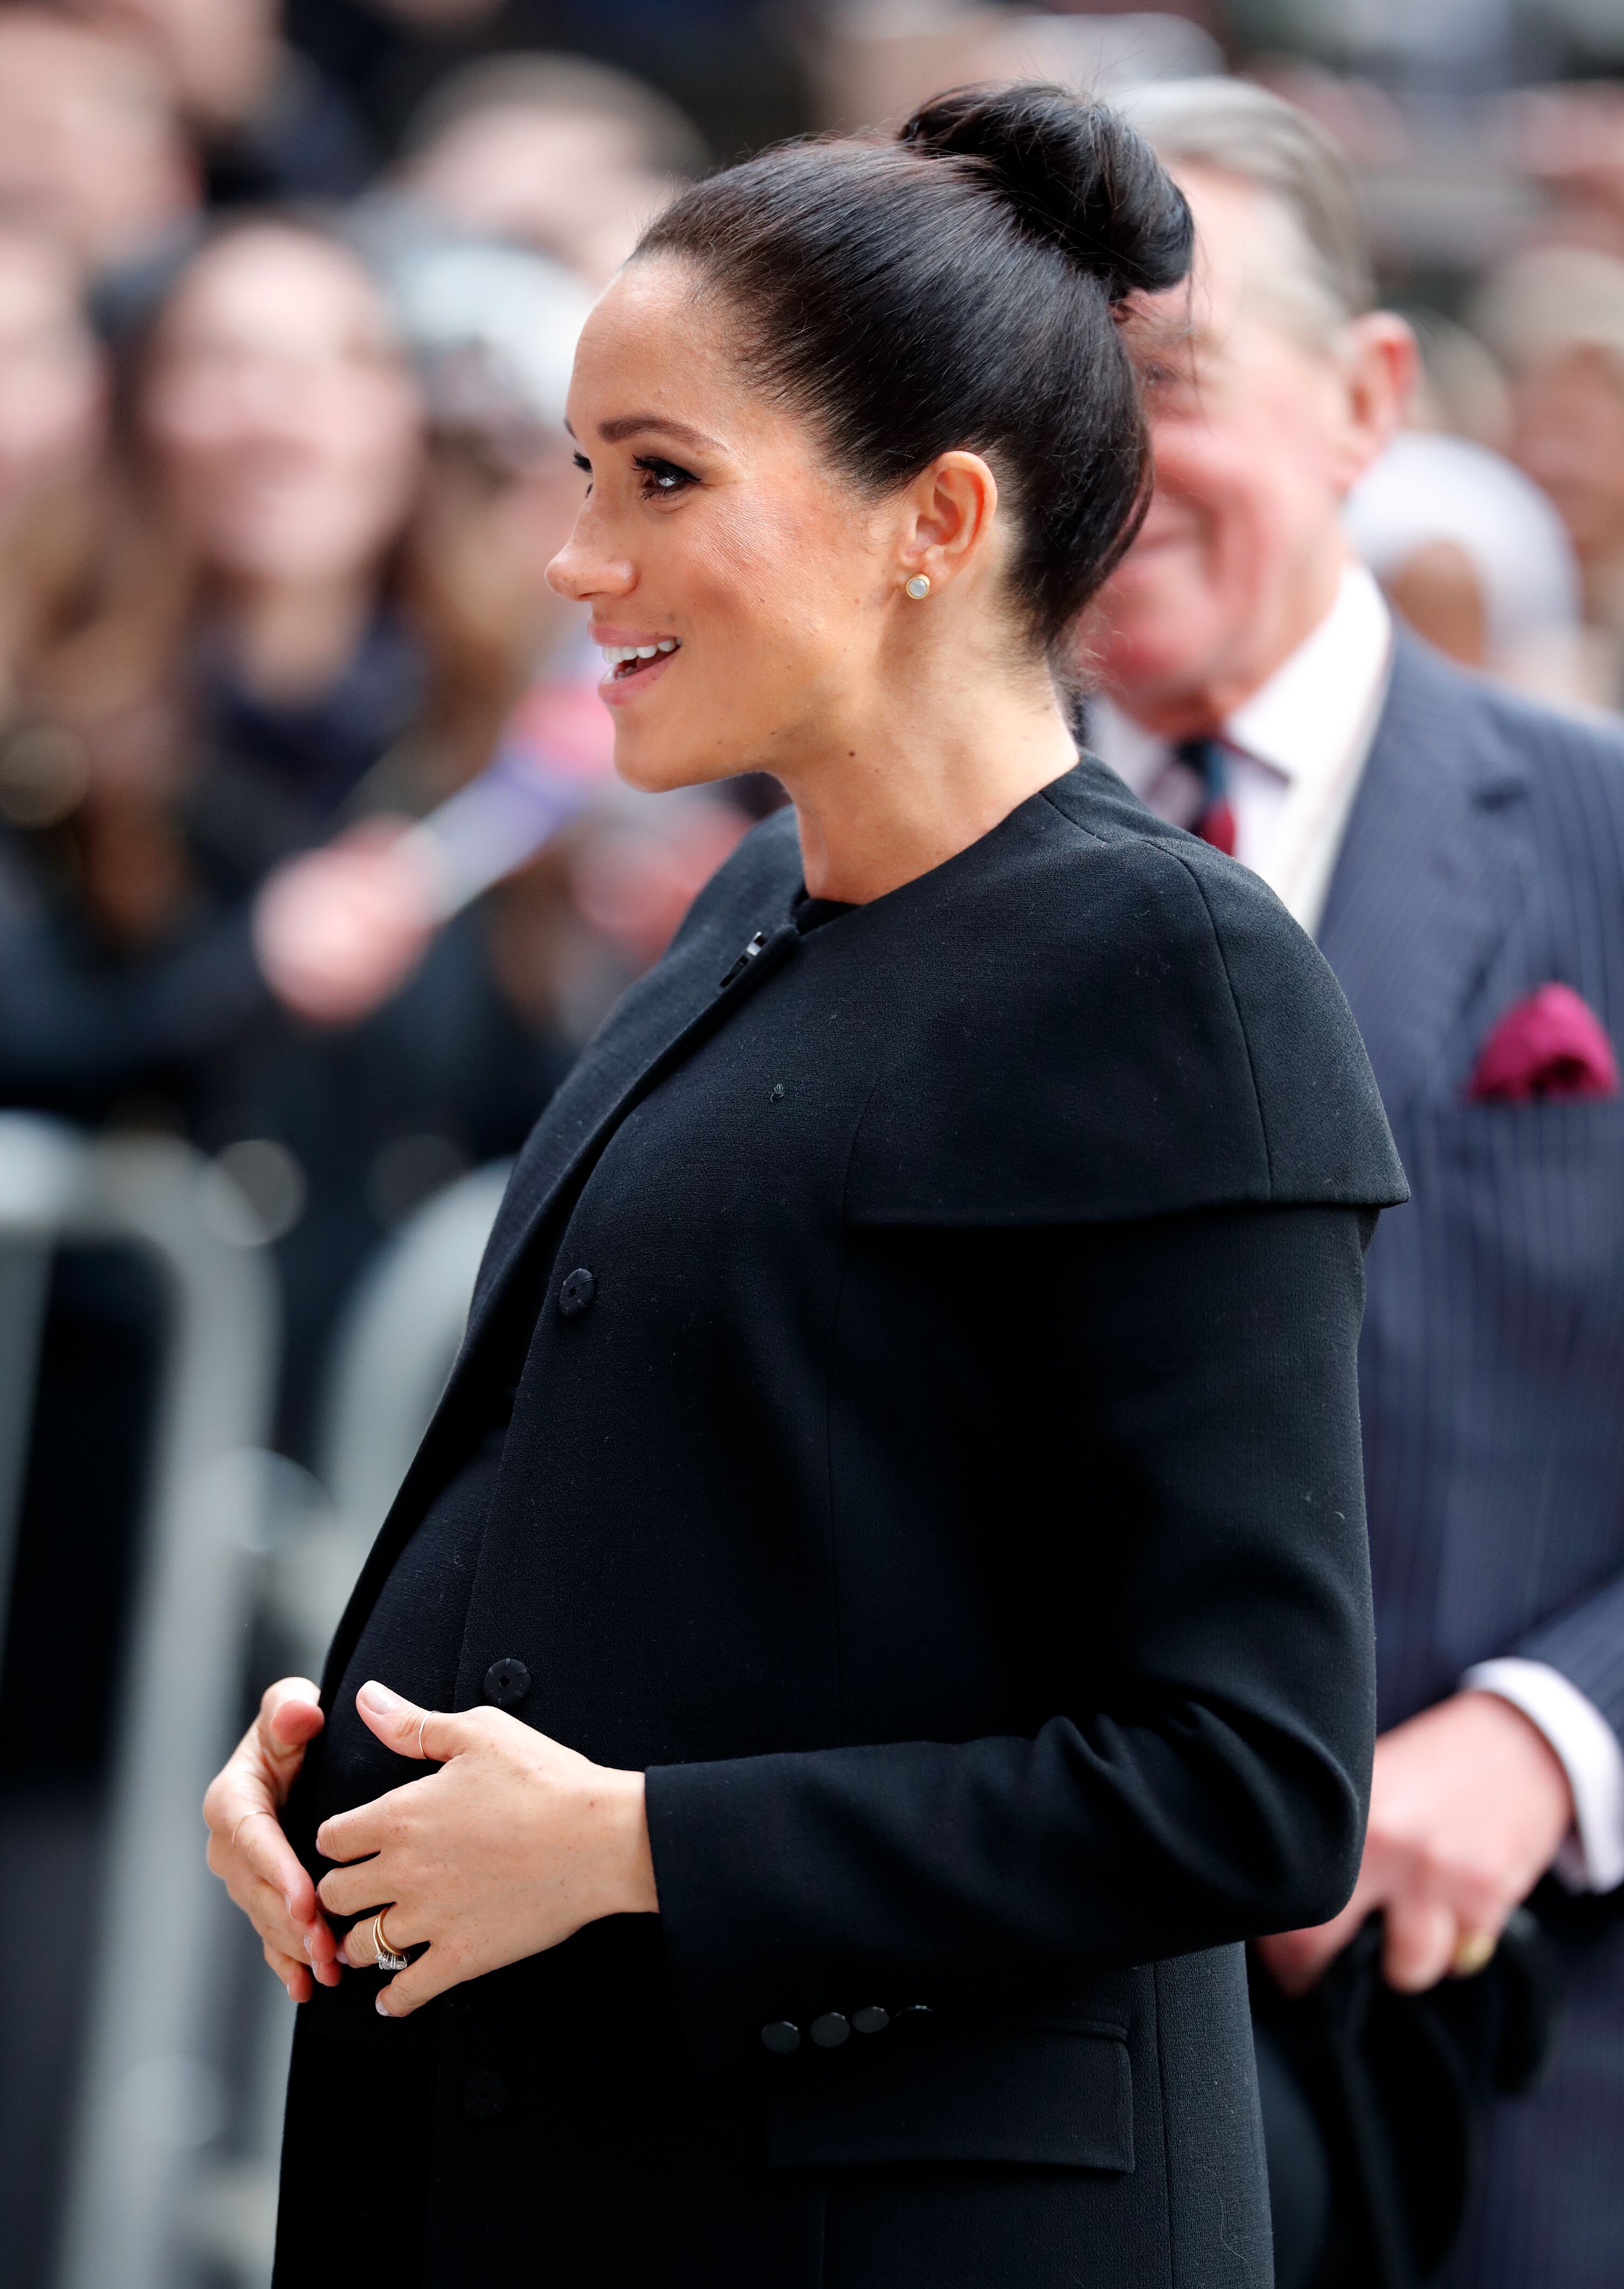 Meghan Markle at the City University of West London in January 2019 | Photo: Getty Images